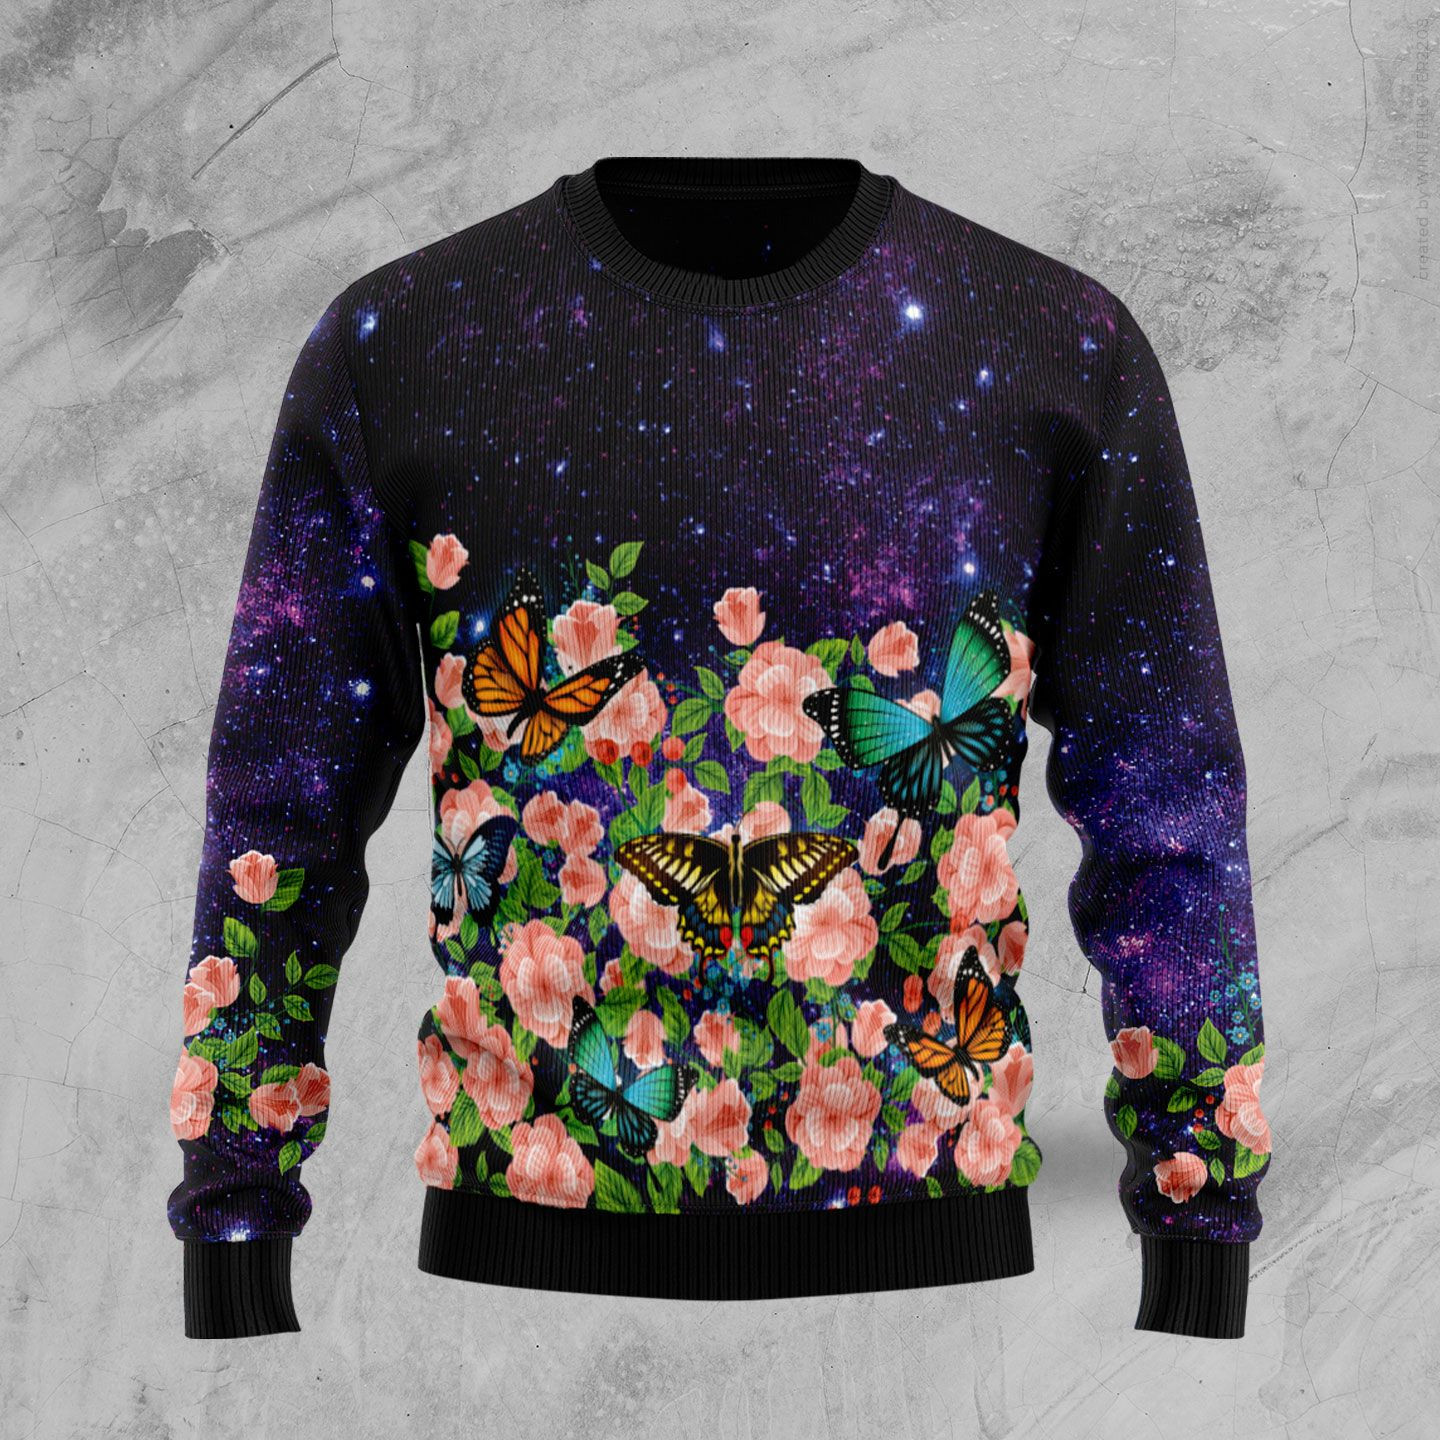 Butterfly Flowers Ugly Christmas Sweater Ugly Sweater For Men Women, Holiday Sweater